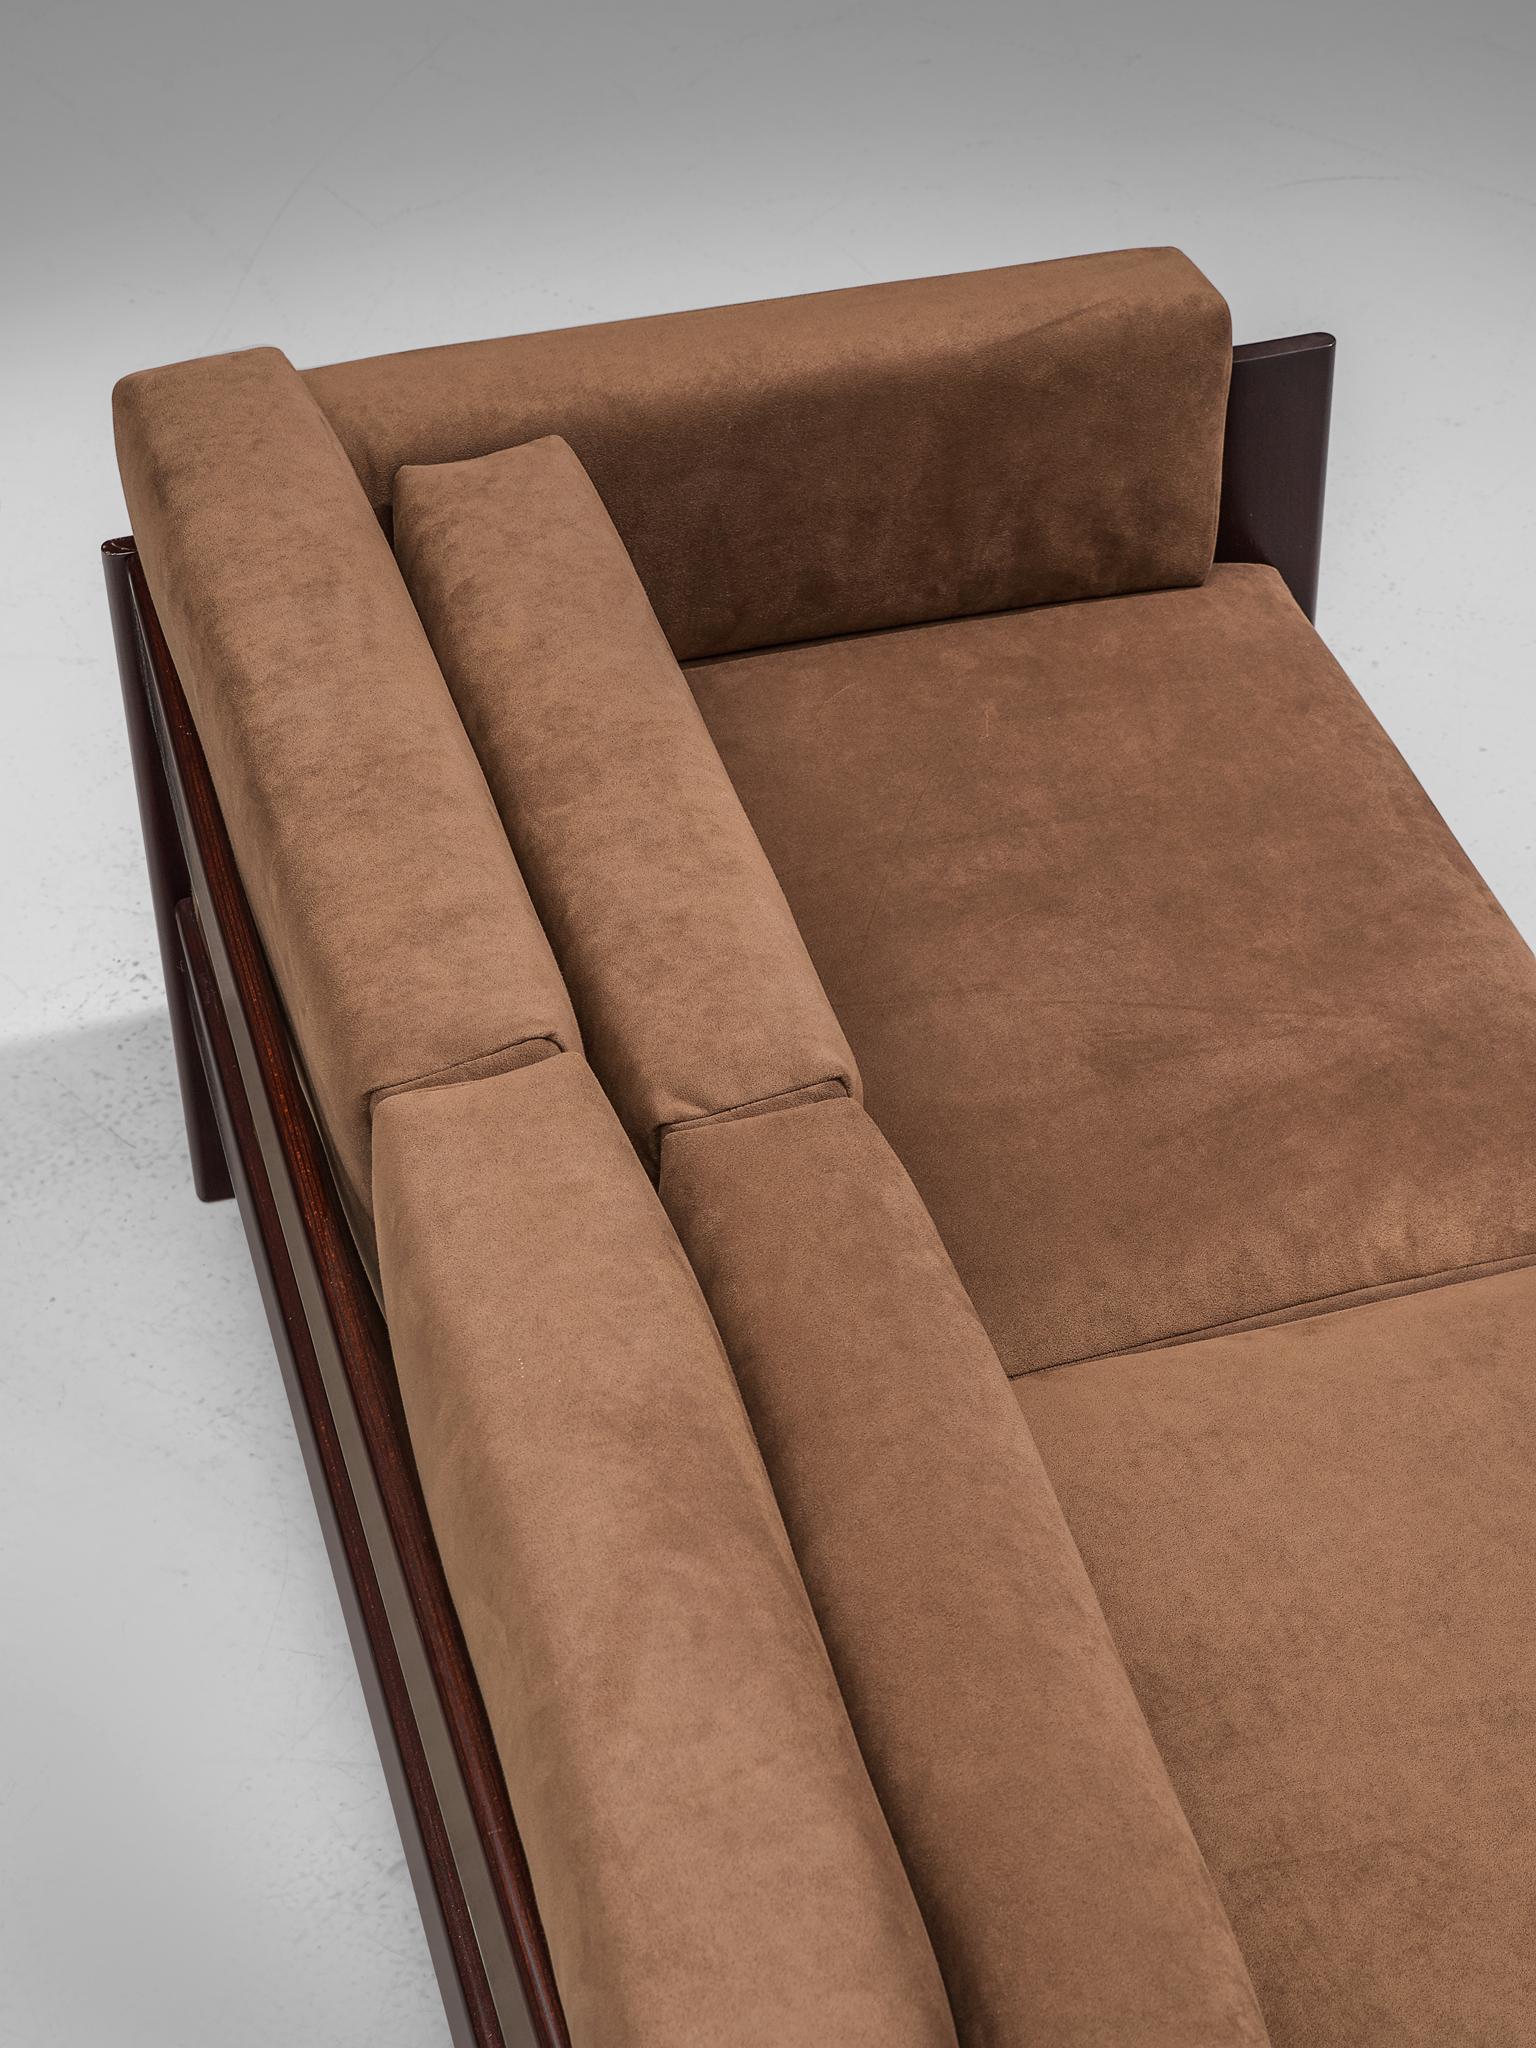 Stained Sergio Asti for Poltronova Sofa 'Zelda' in Taupe Upholstery 